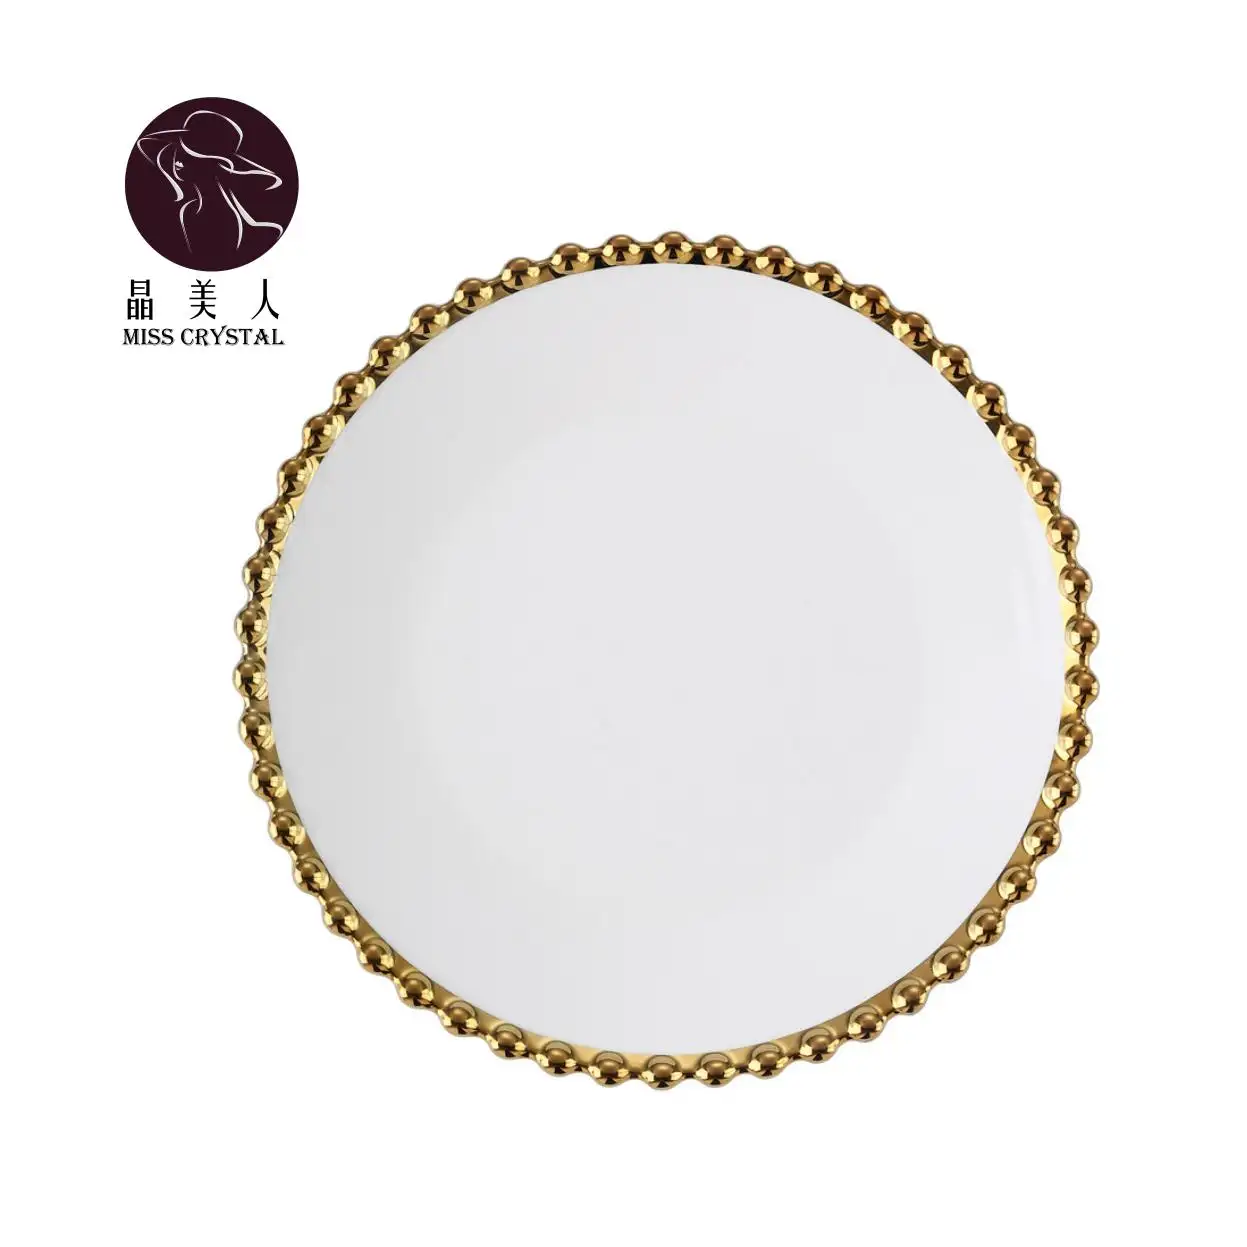 Single Box Packaging Western Dinner Plate Luxury Nordic Ceramic Dinnerware Set with Gold Beads and White Tableware